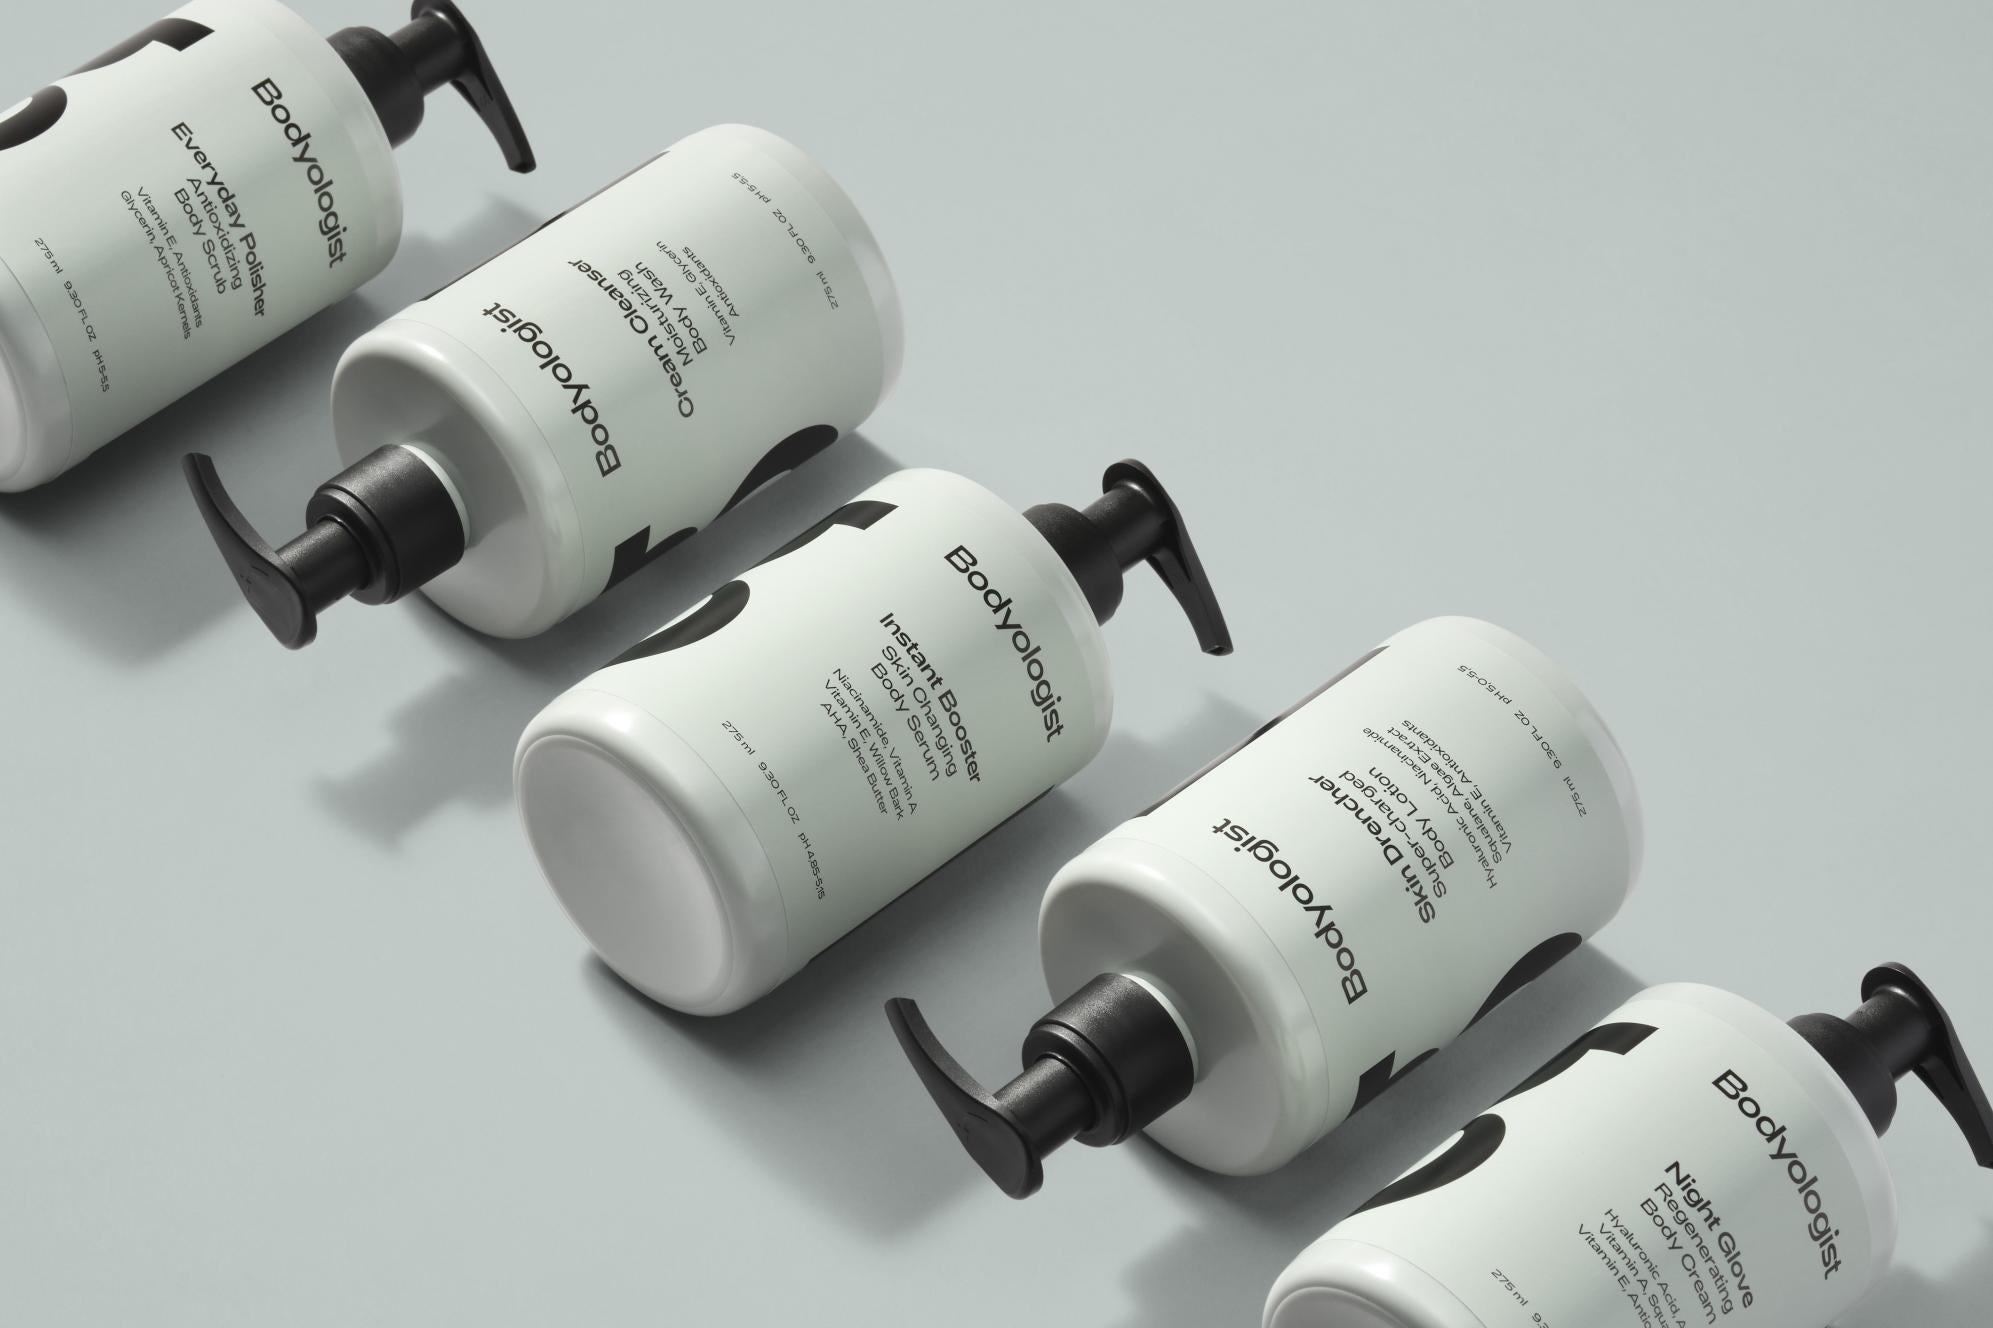 Introducing Bodyologist: The Danish Clean Body Care Line